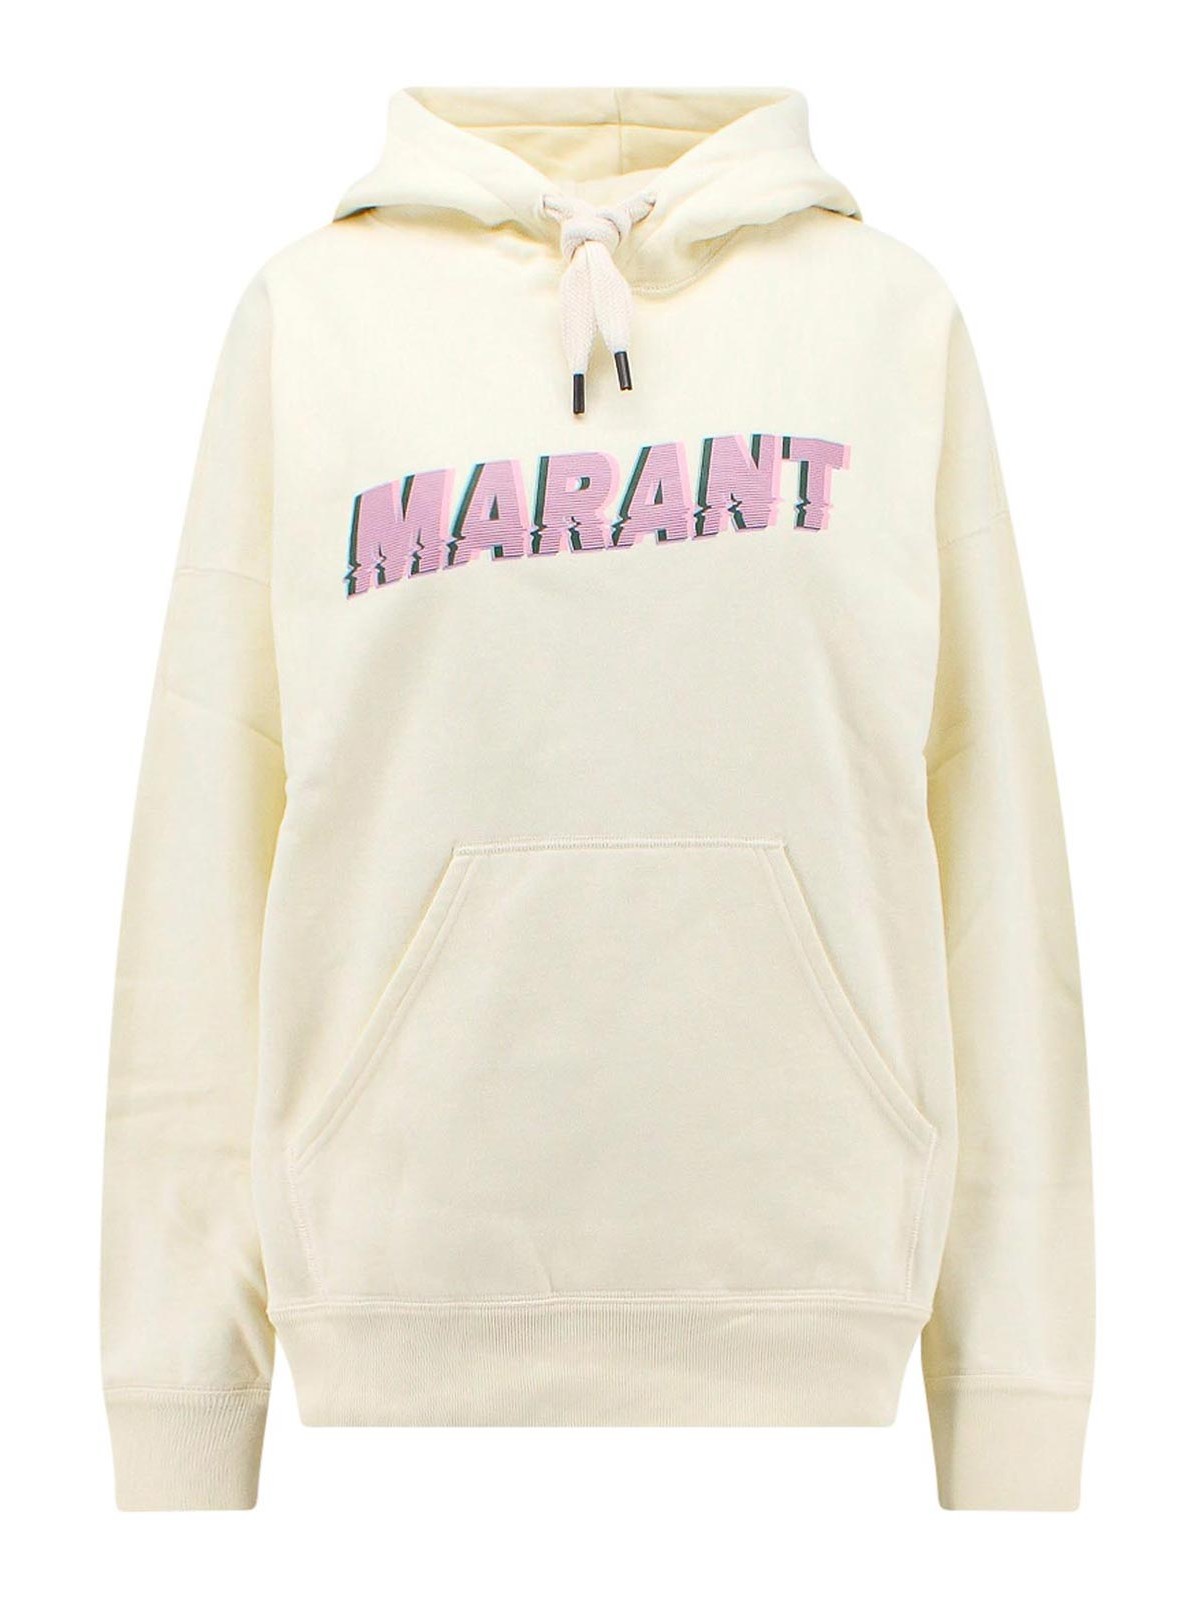 Isabel Marant Blend Sweatshirt With Frontal Printed Logo In White